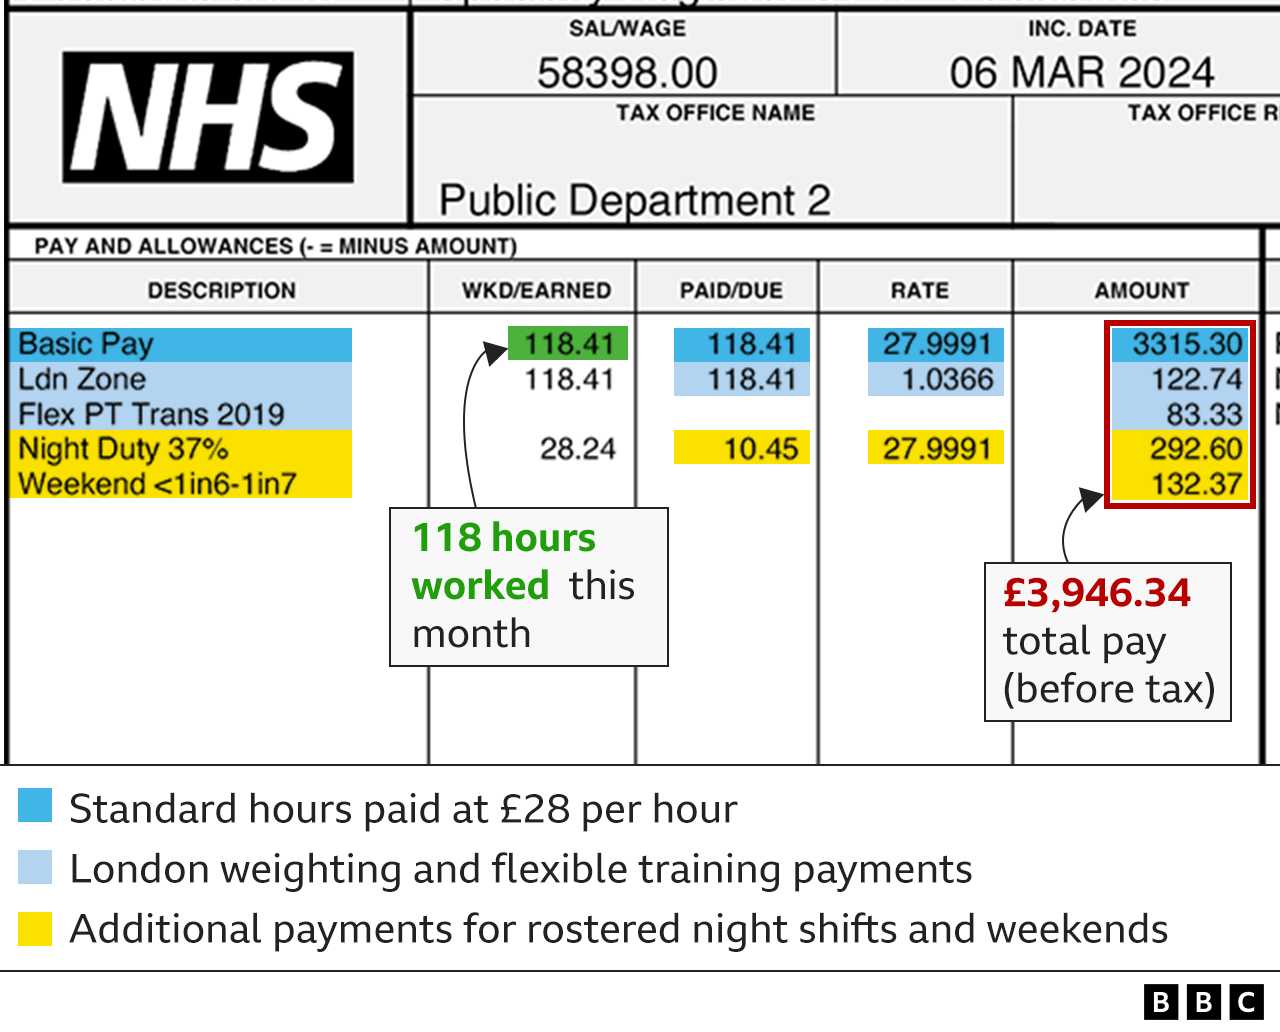 Wage slip for monthly payments and allowances, showing basic pay at £27.99 per hour, London weighting at £1.04 per hour and flexible training payments of £83.33 each month, plus additional payments for night shifts as an extra 37% of basic pay and weekend work as a flat payment of £132.37 per month. The total number of hours worked was 118.41 hours and the total pay before tax was £3,946.34.